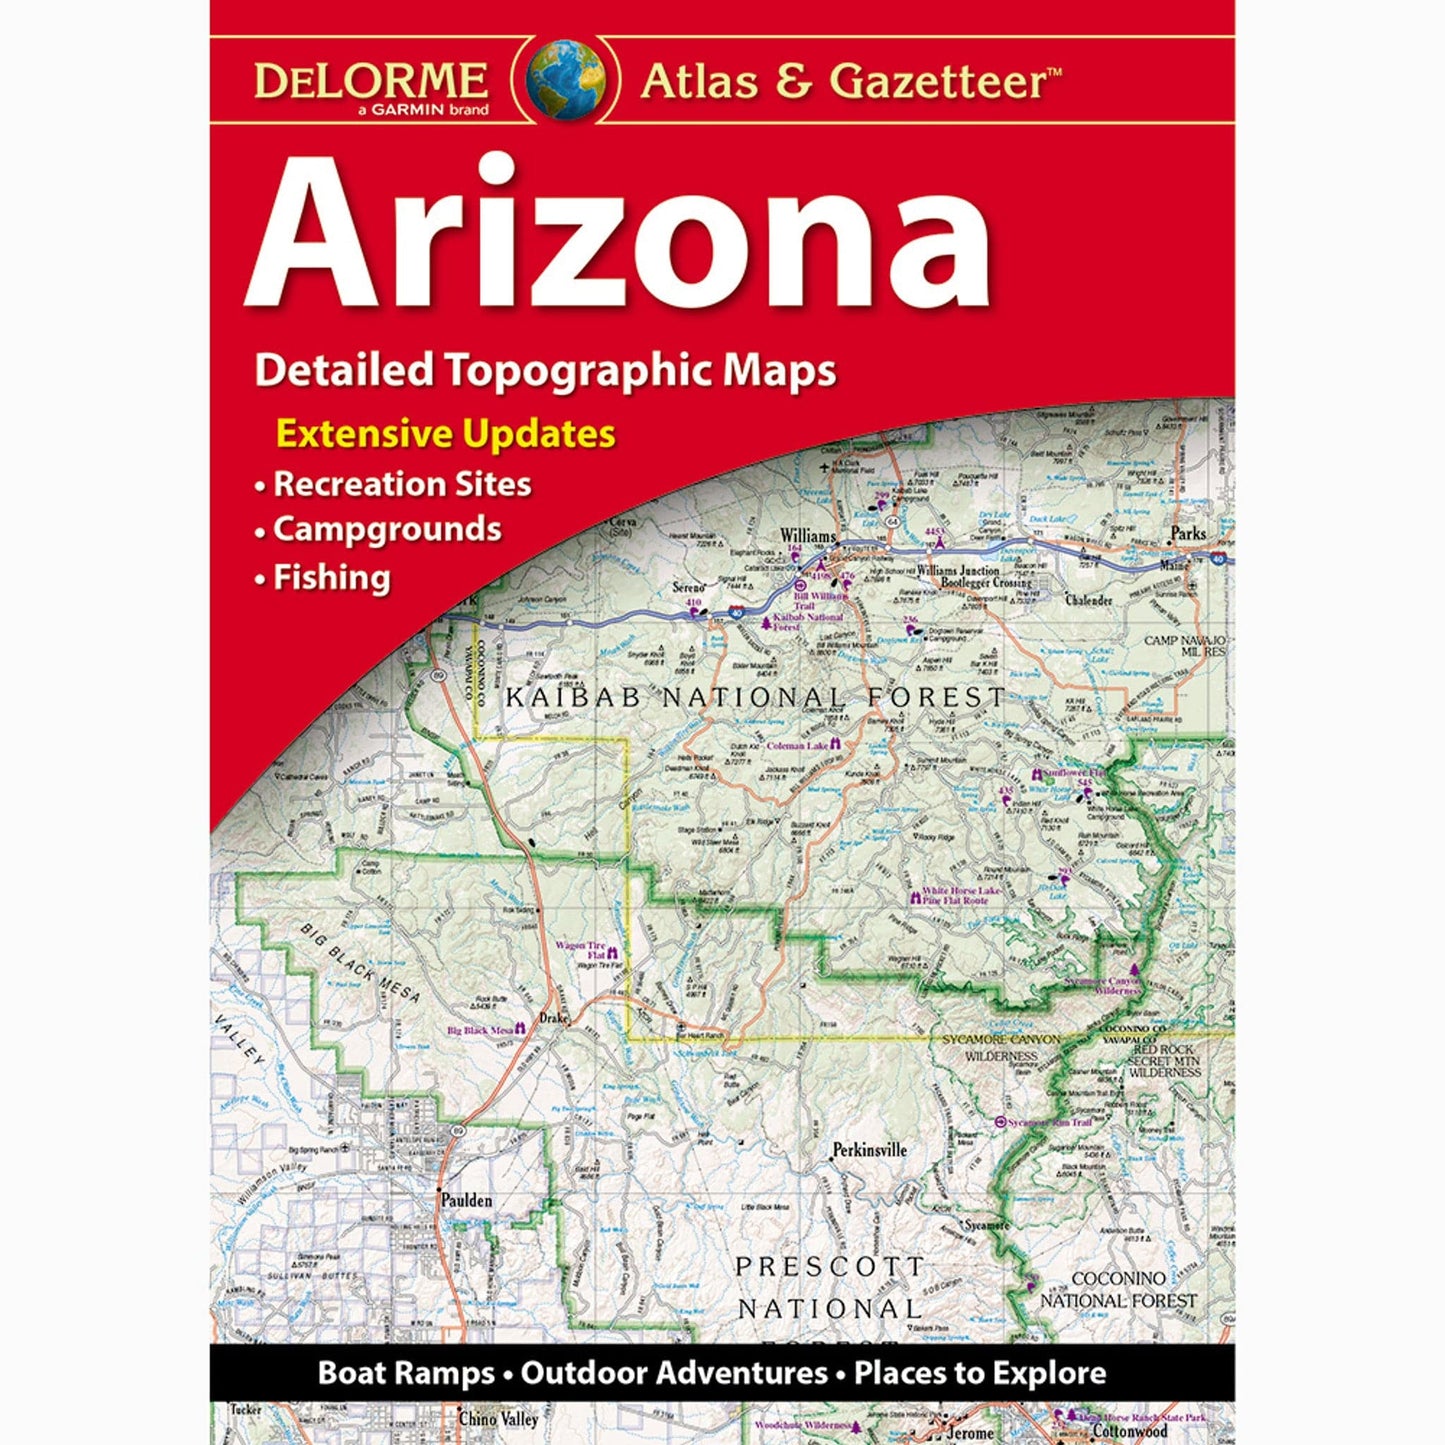 Featuring the Arizona Atlas & Gazetteer atlas, book, gazetteer, map manufactured by Partners West shown here from one angle.